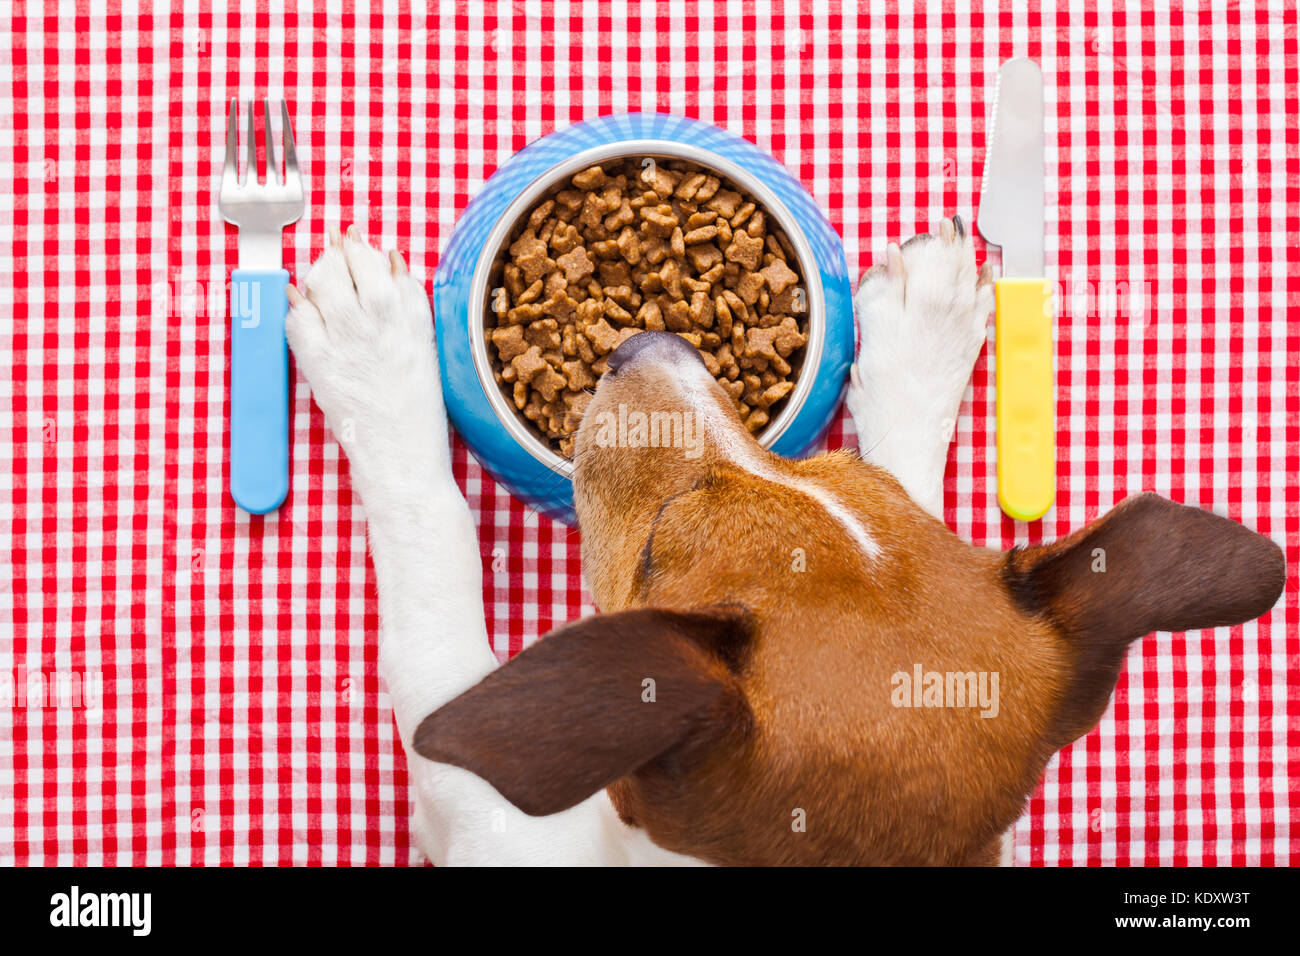 full dog food bowl with knife and fork on tablecloth,paws and head of a dog Stock Photo